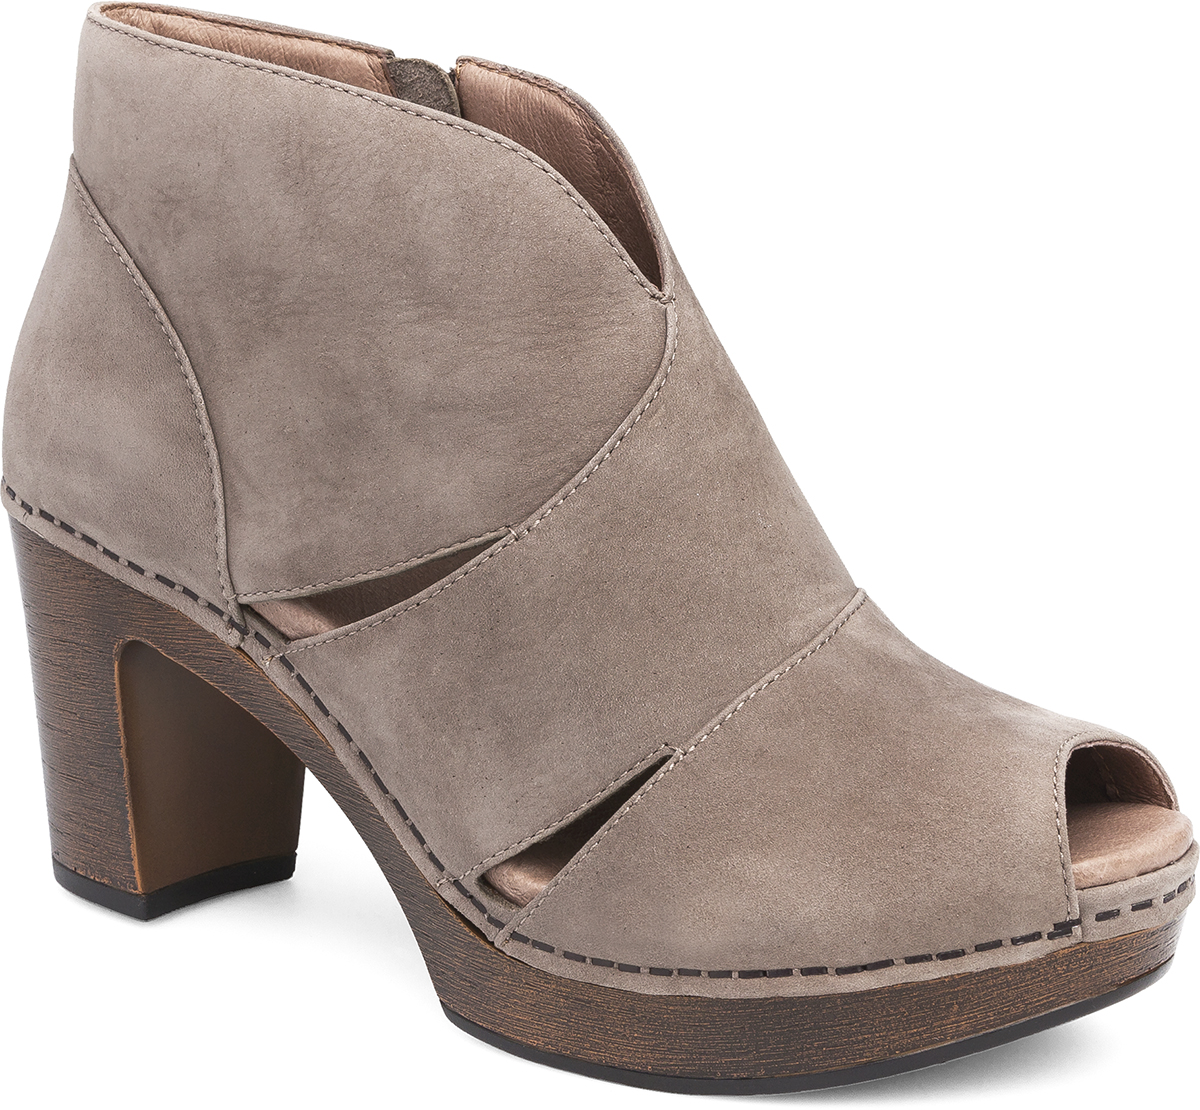 The Dansko Taupe Milled Nubuck from the Delphina collection.